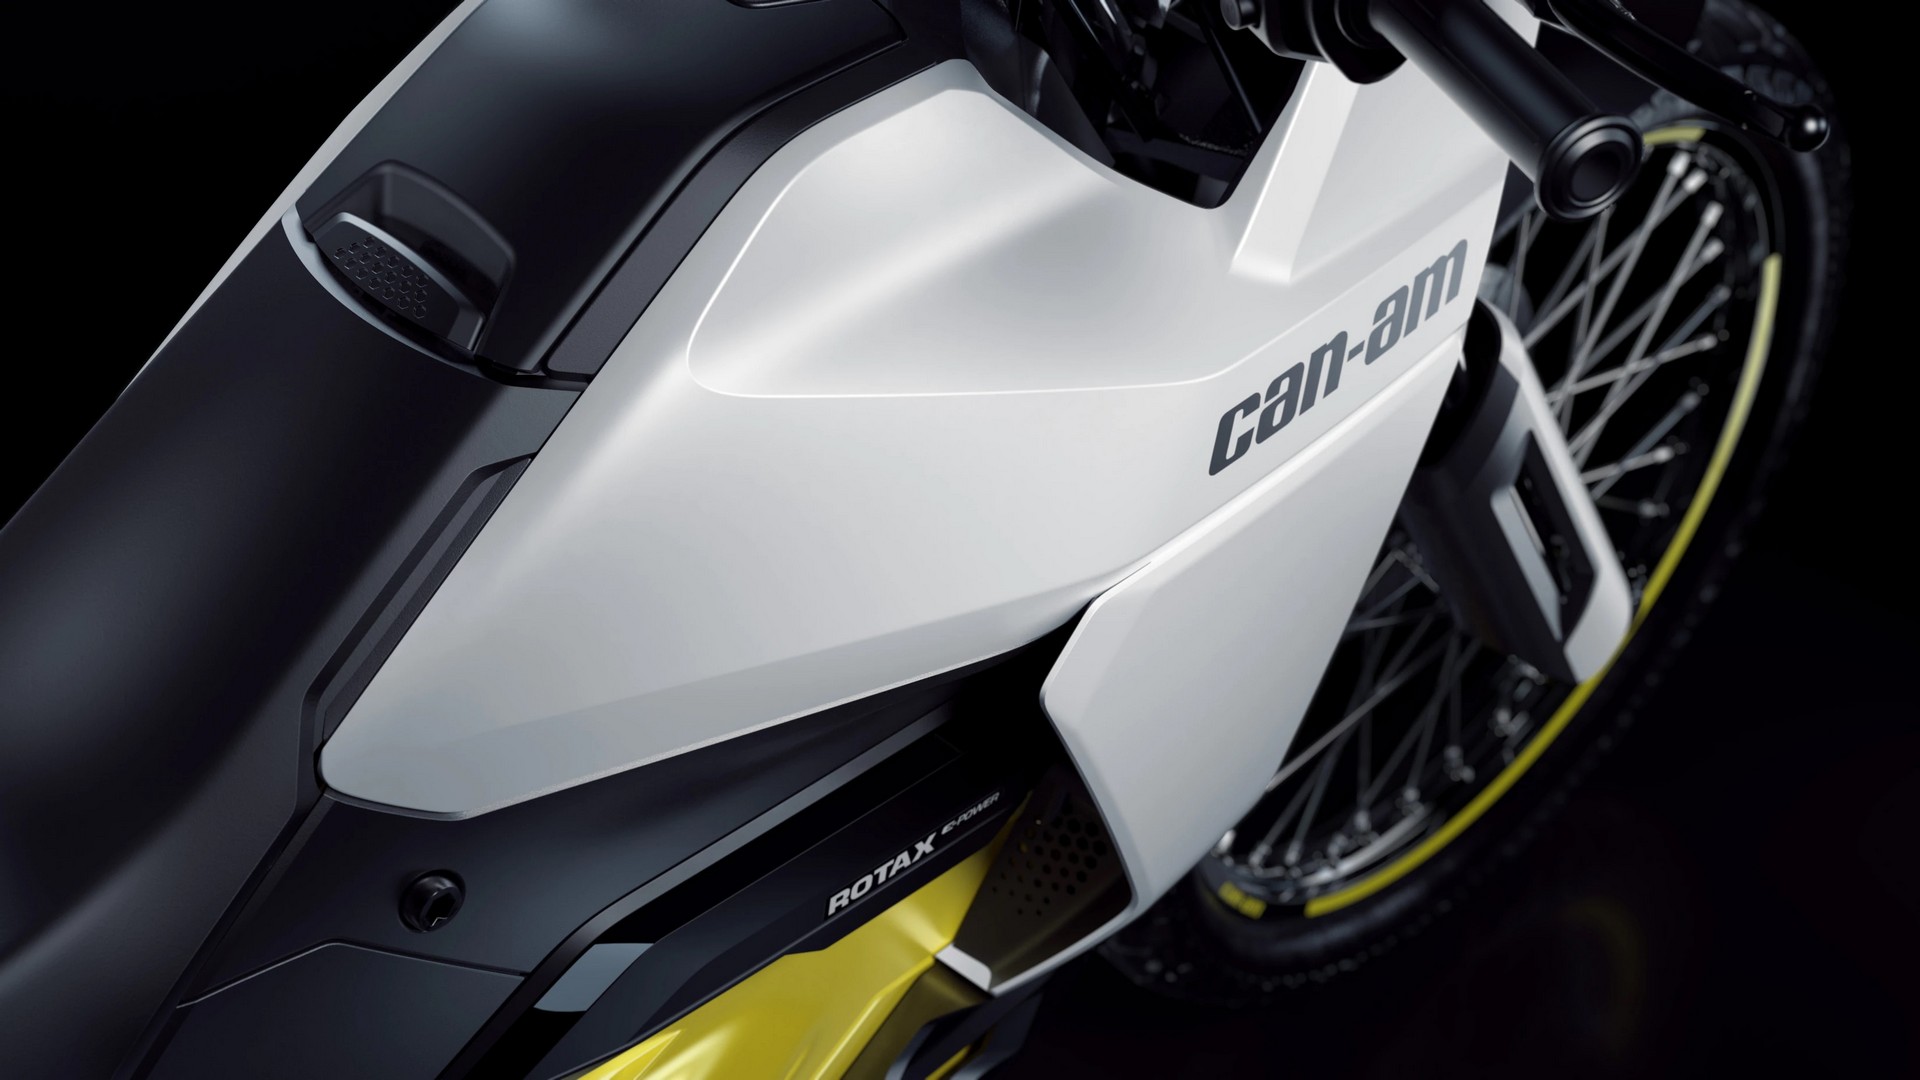 CanAm Unveils Origin And Pulse Electric Motorcycles, Set To Arrive In